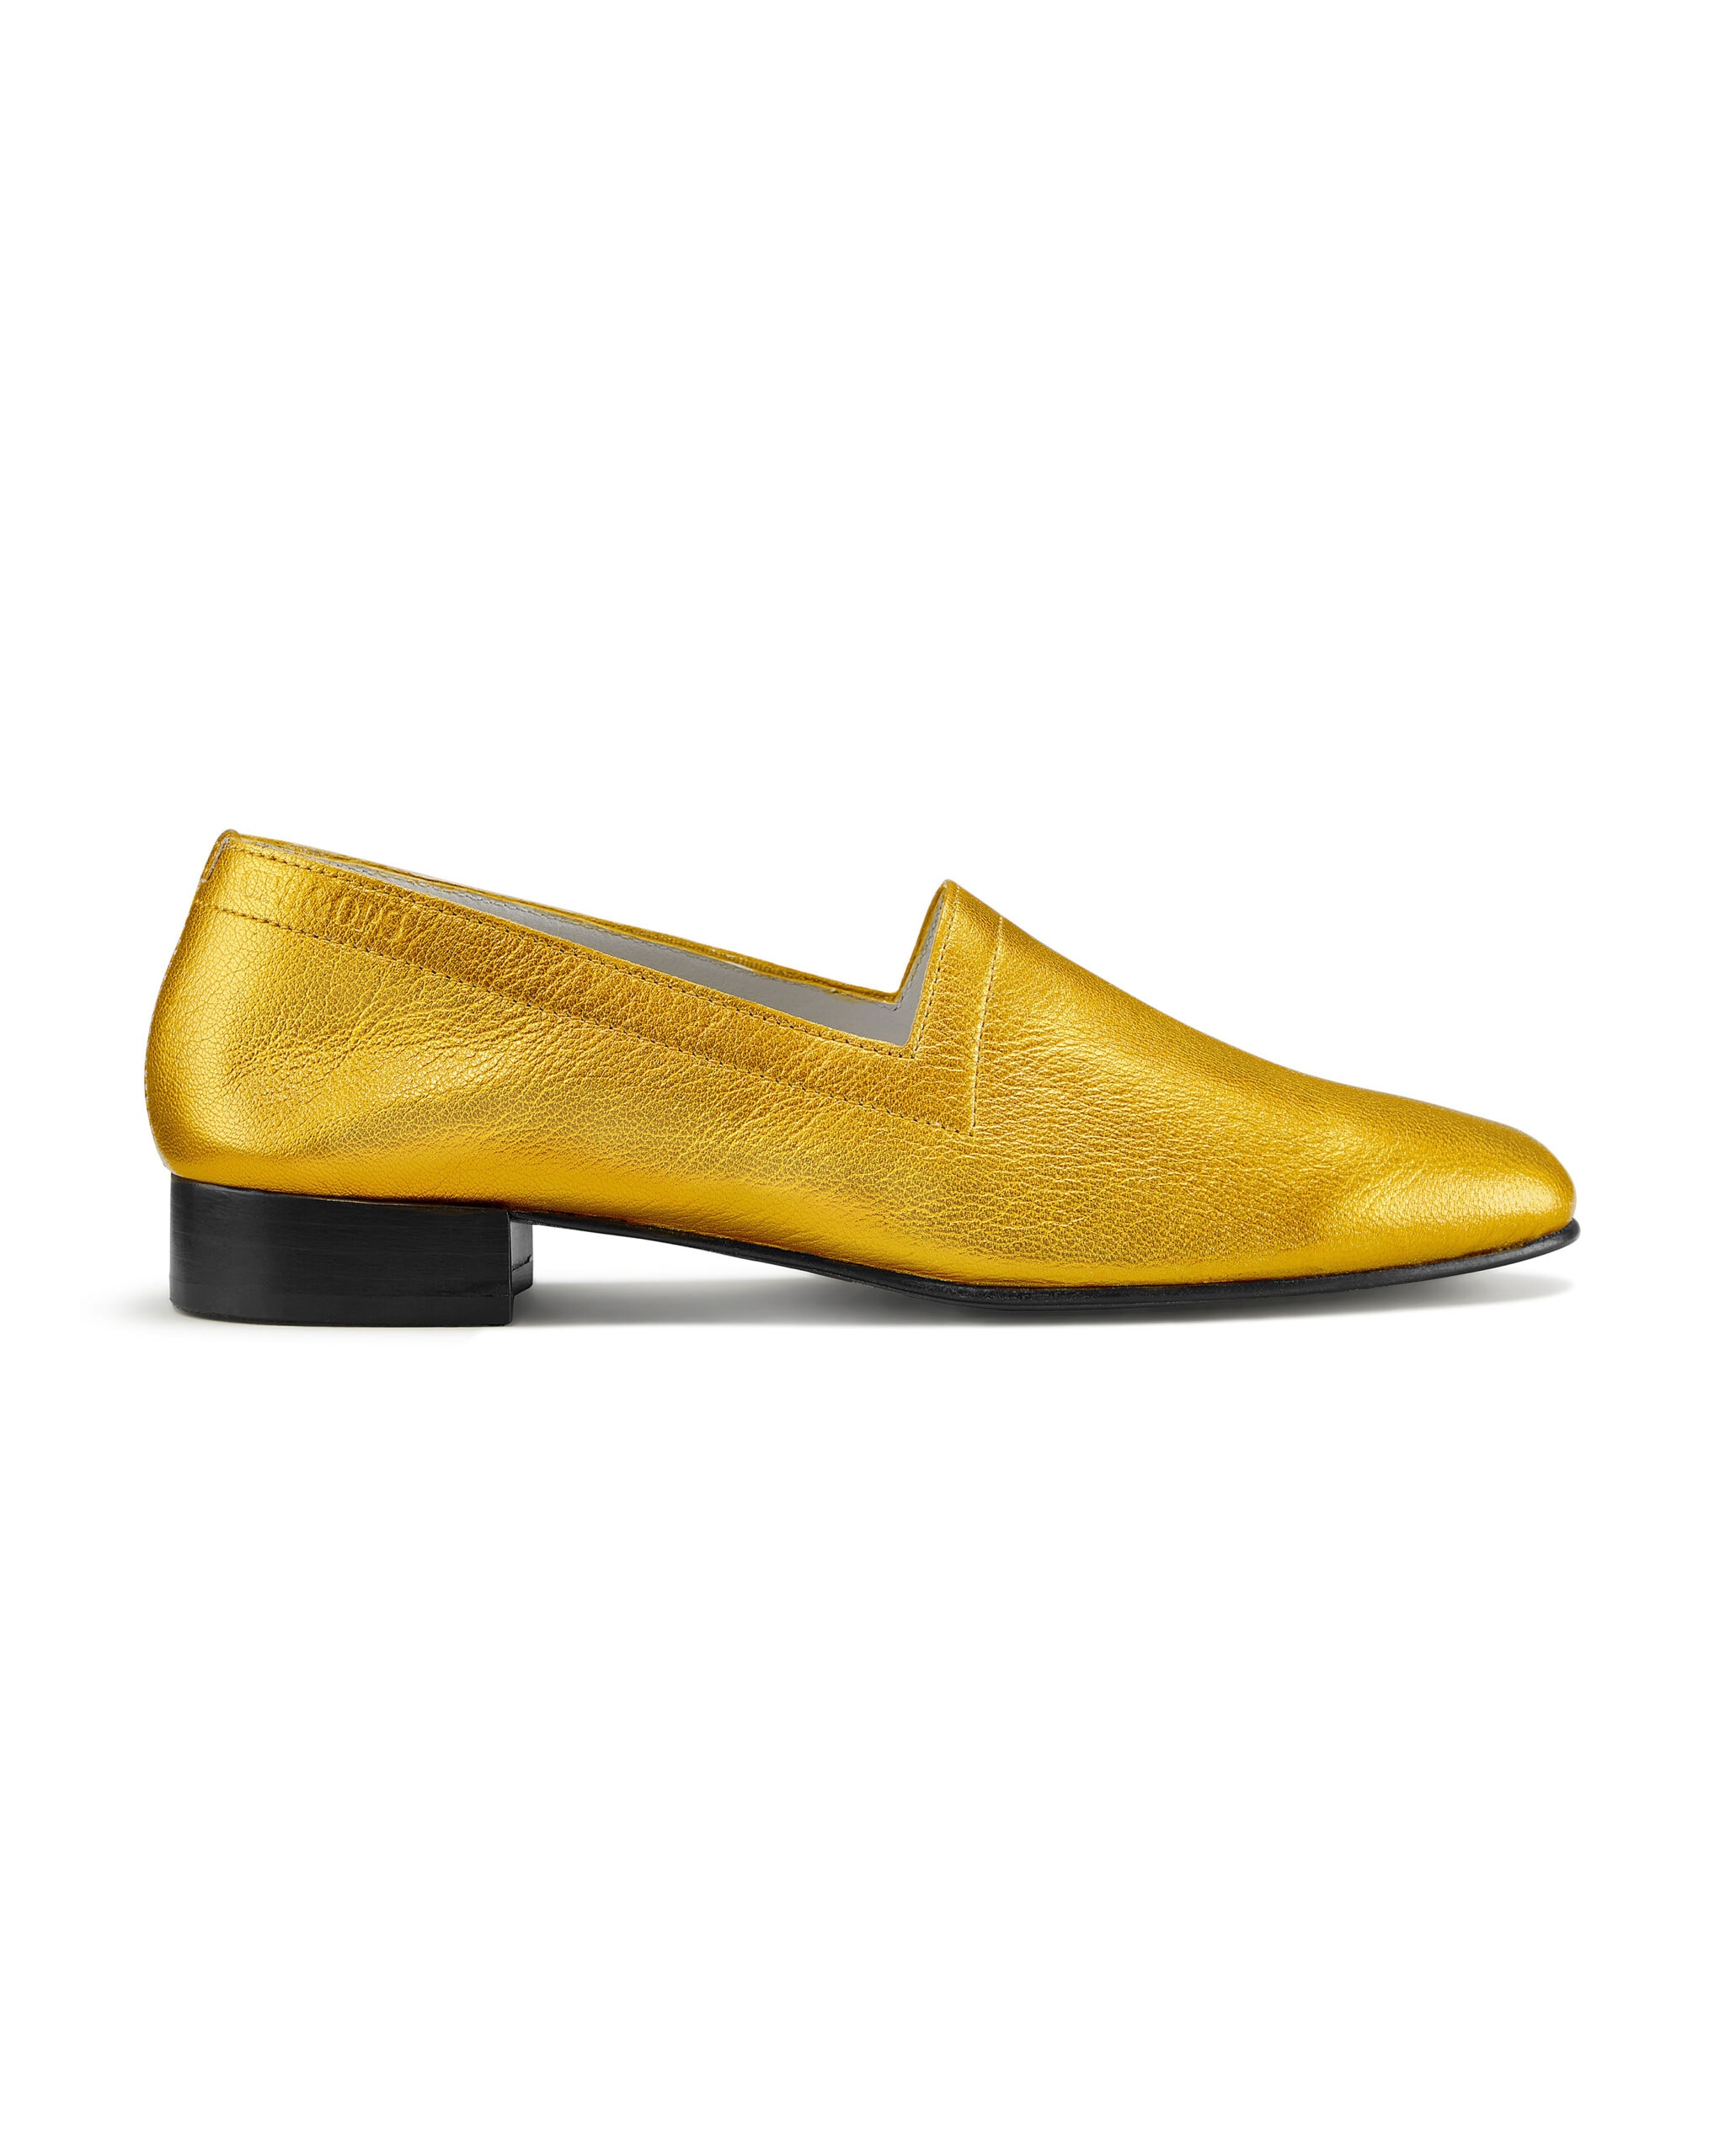 Ops&Ops No11 Yellow Gold metallic leather block-heel loafer, side view